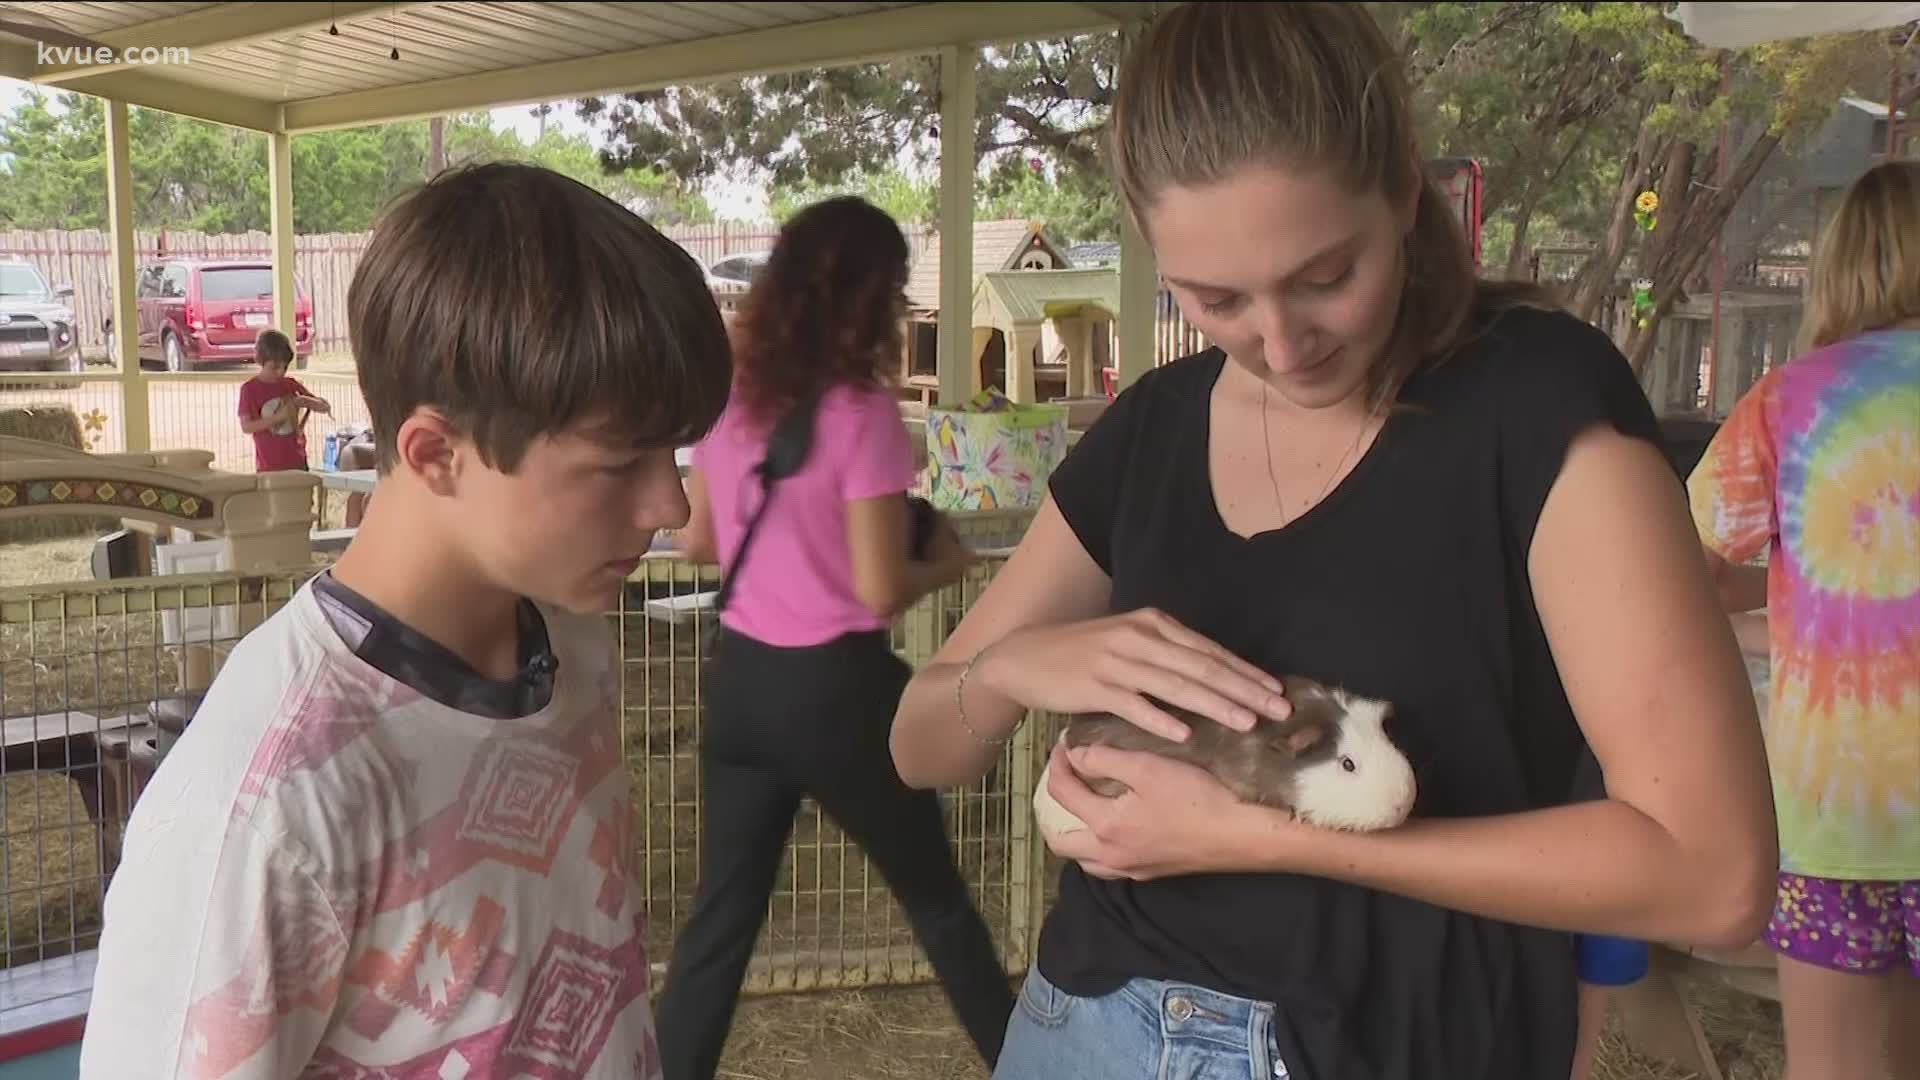 If 14-year-old Cole can overcome his fear of holding crazy critters, he can definitely handle finding a family!